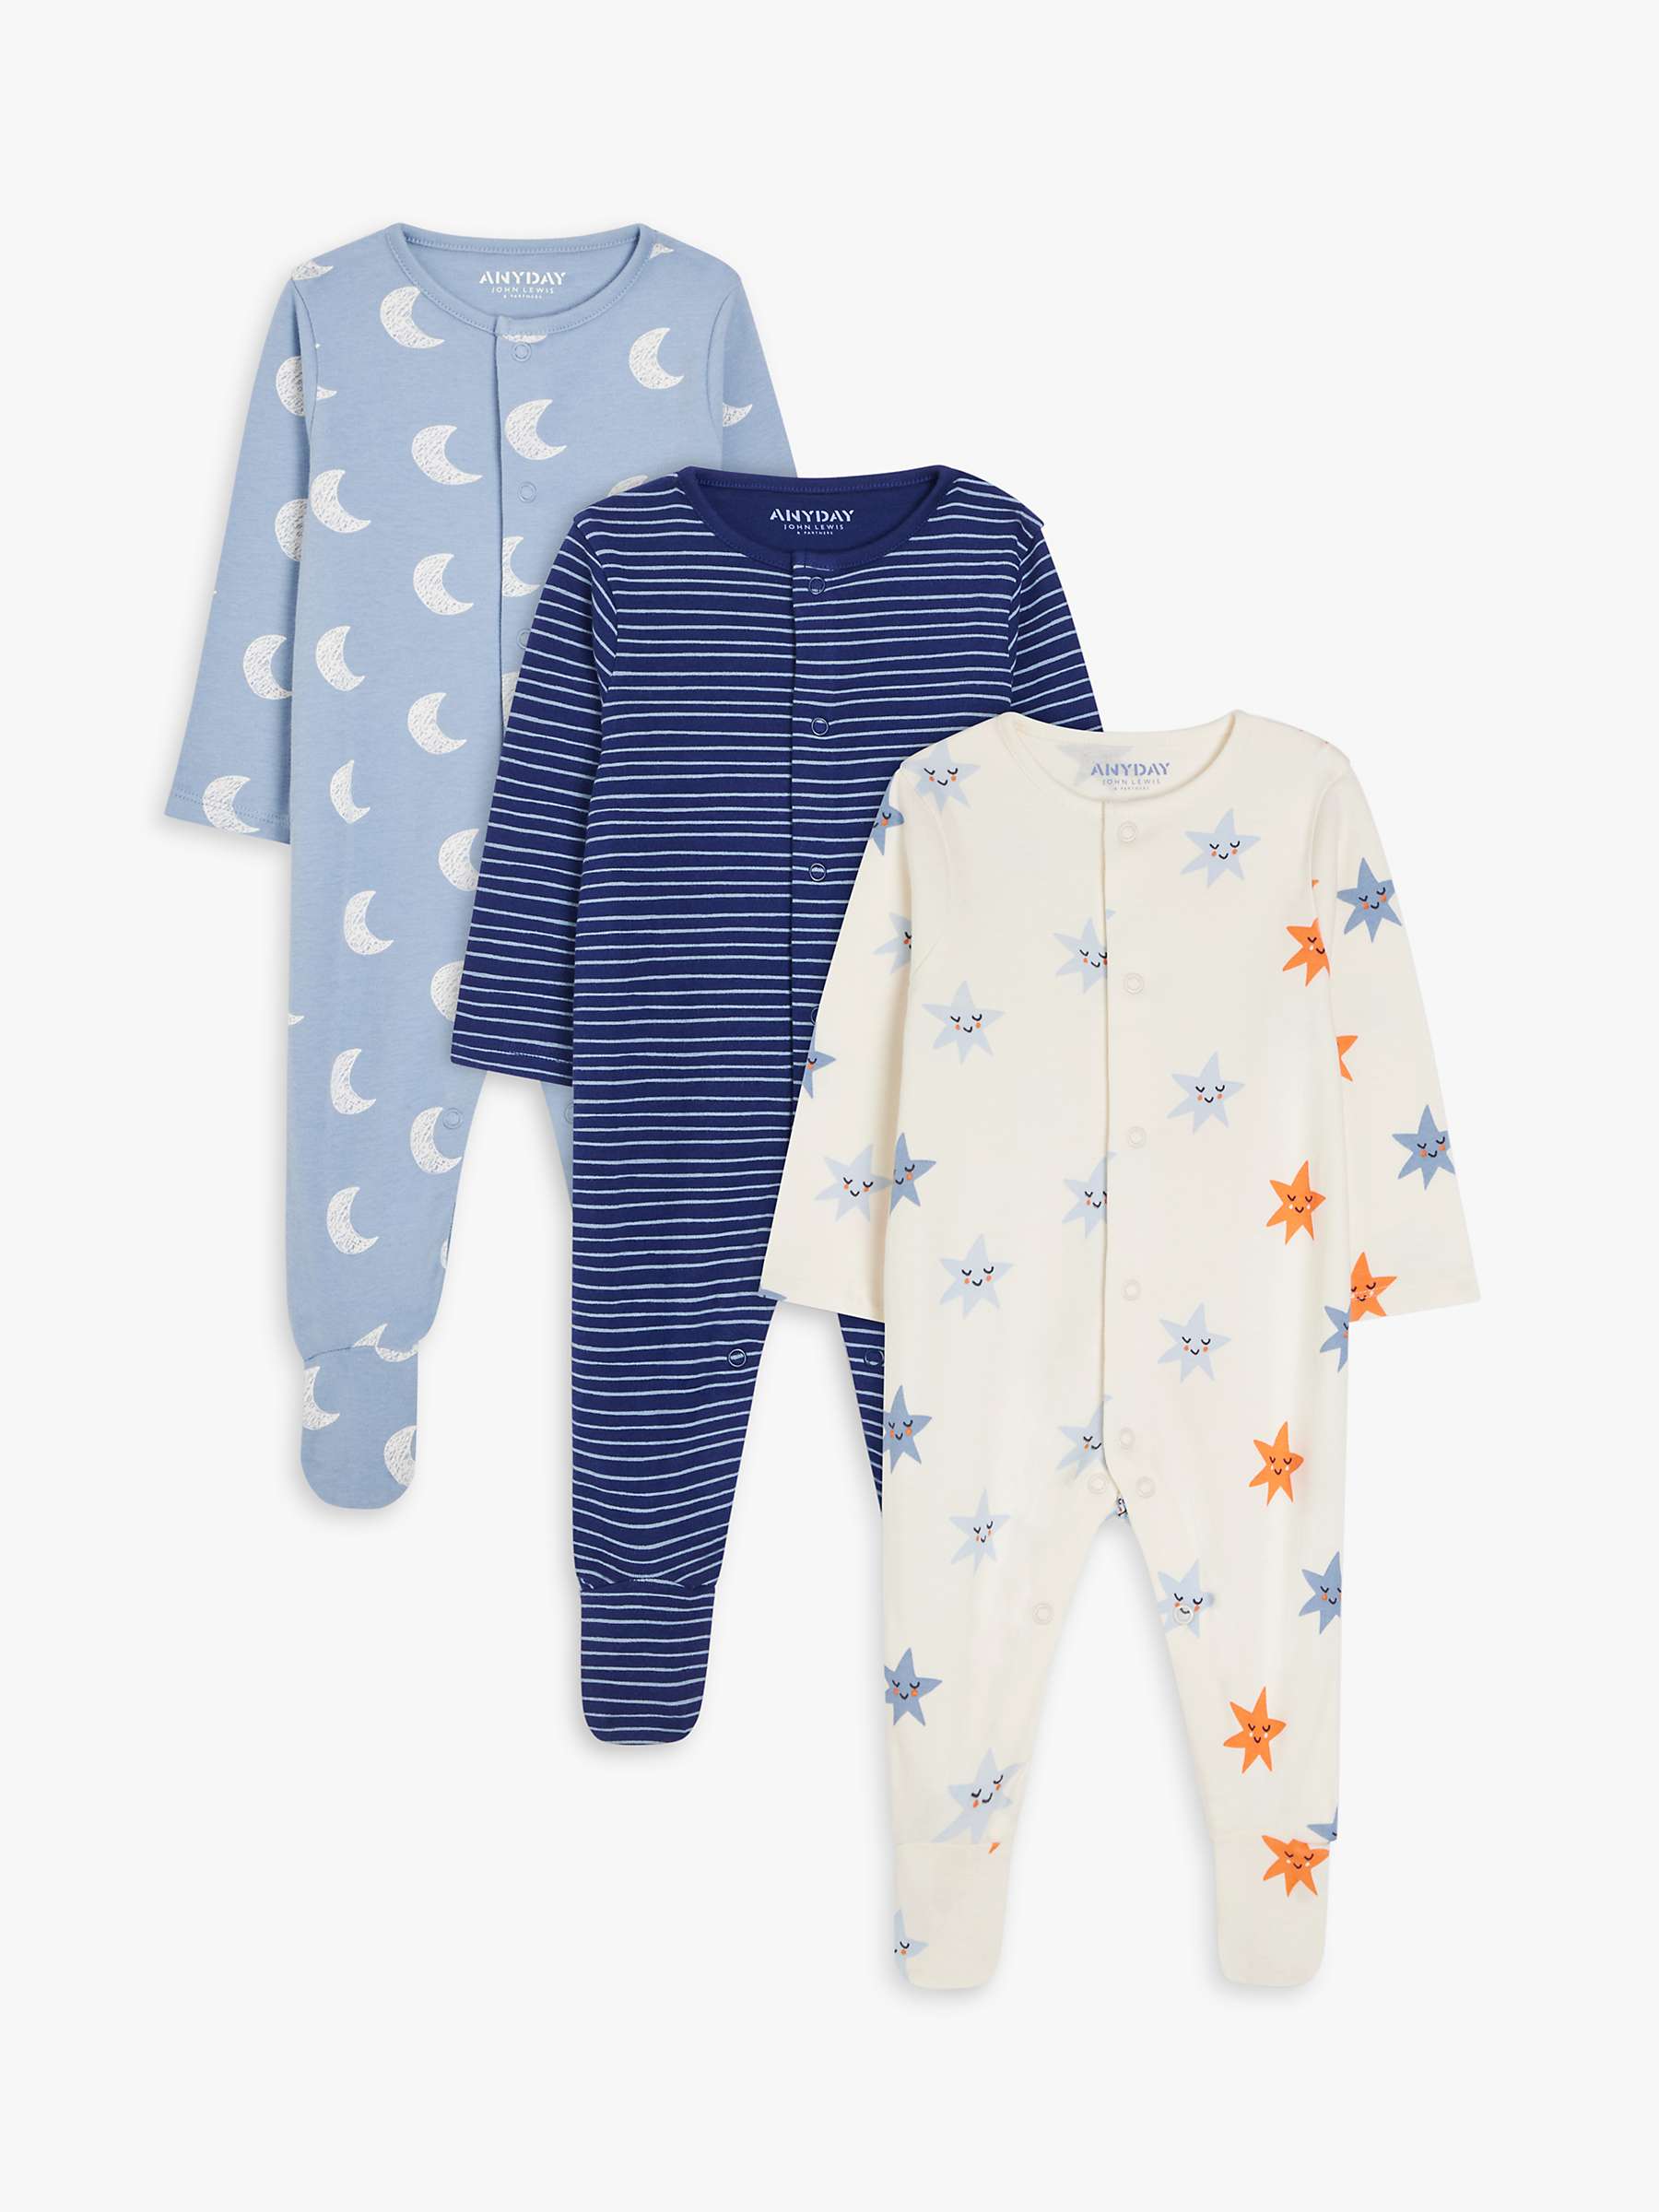 Buy John Lewis ANYDAY Baby Star Stripe Mix Sleepsuits, Pack of 3, Multi Online at johnlewis.com